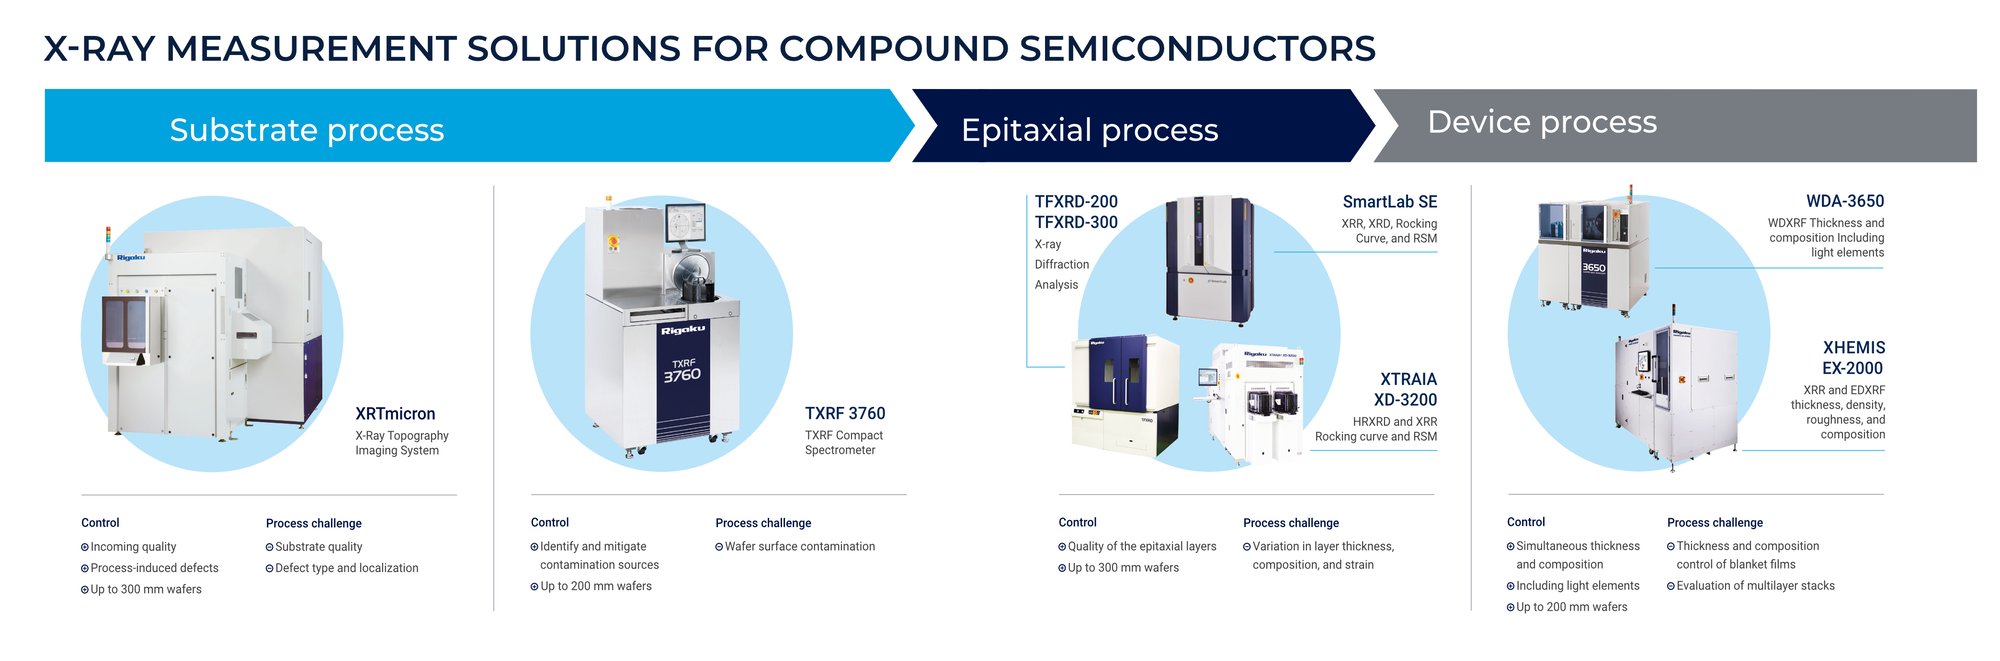 Rigaku Compound Semiconductor Solutions